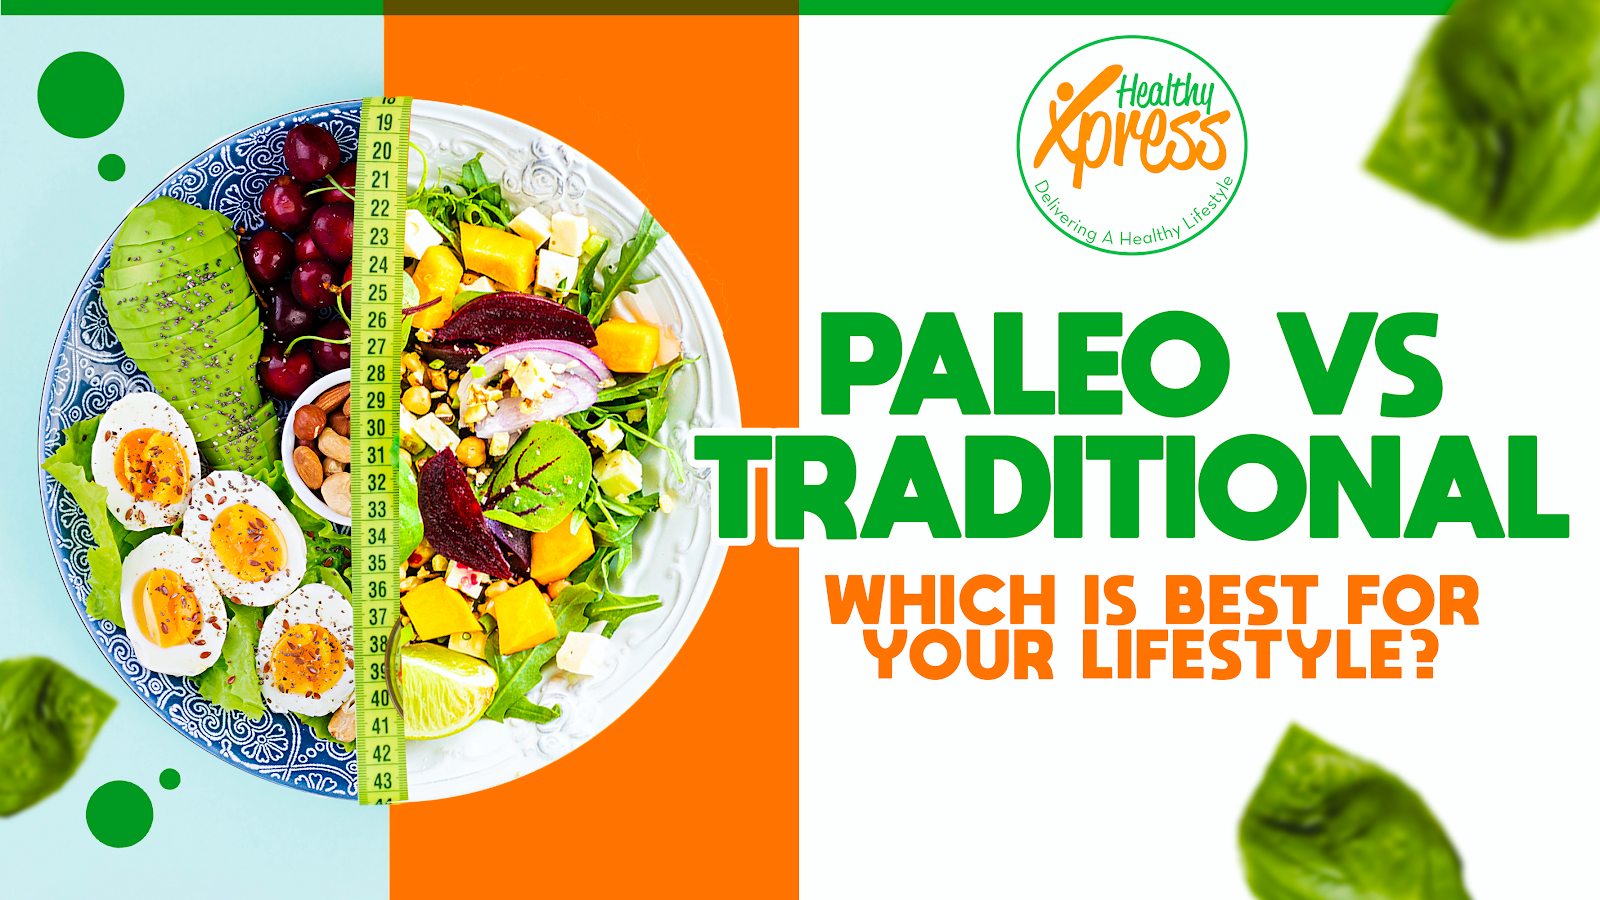 Paleo vs. Traditional: Which is best for your Lifestyle?